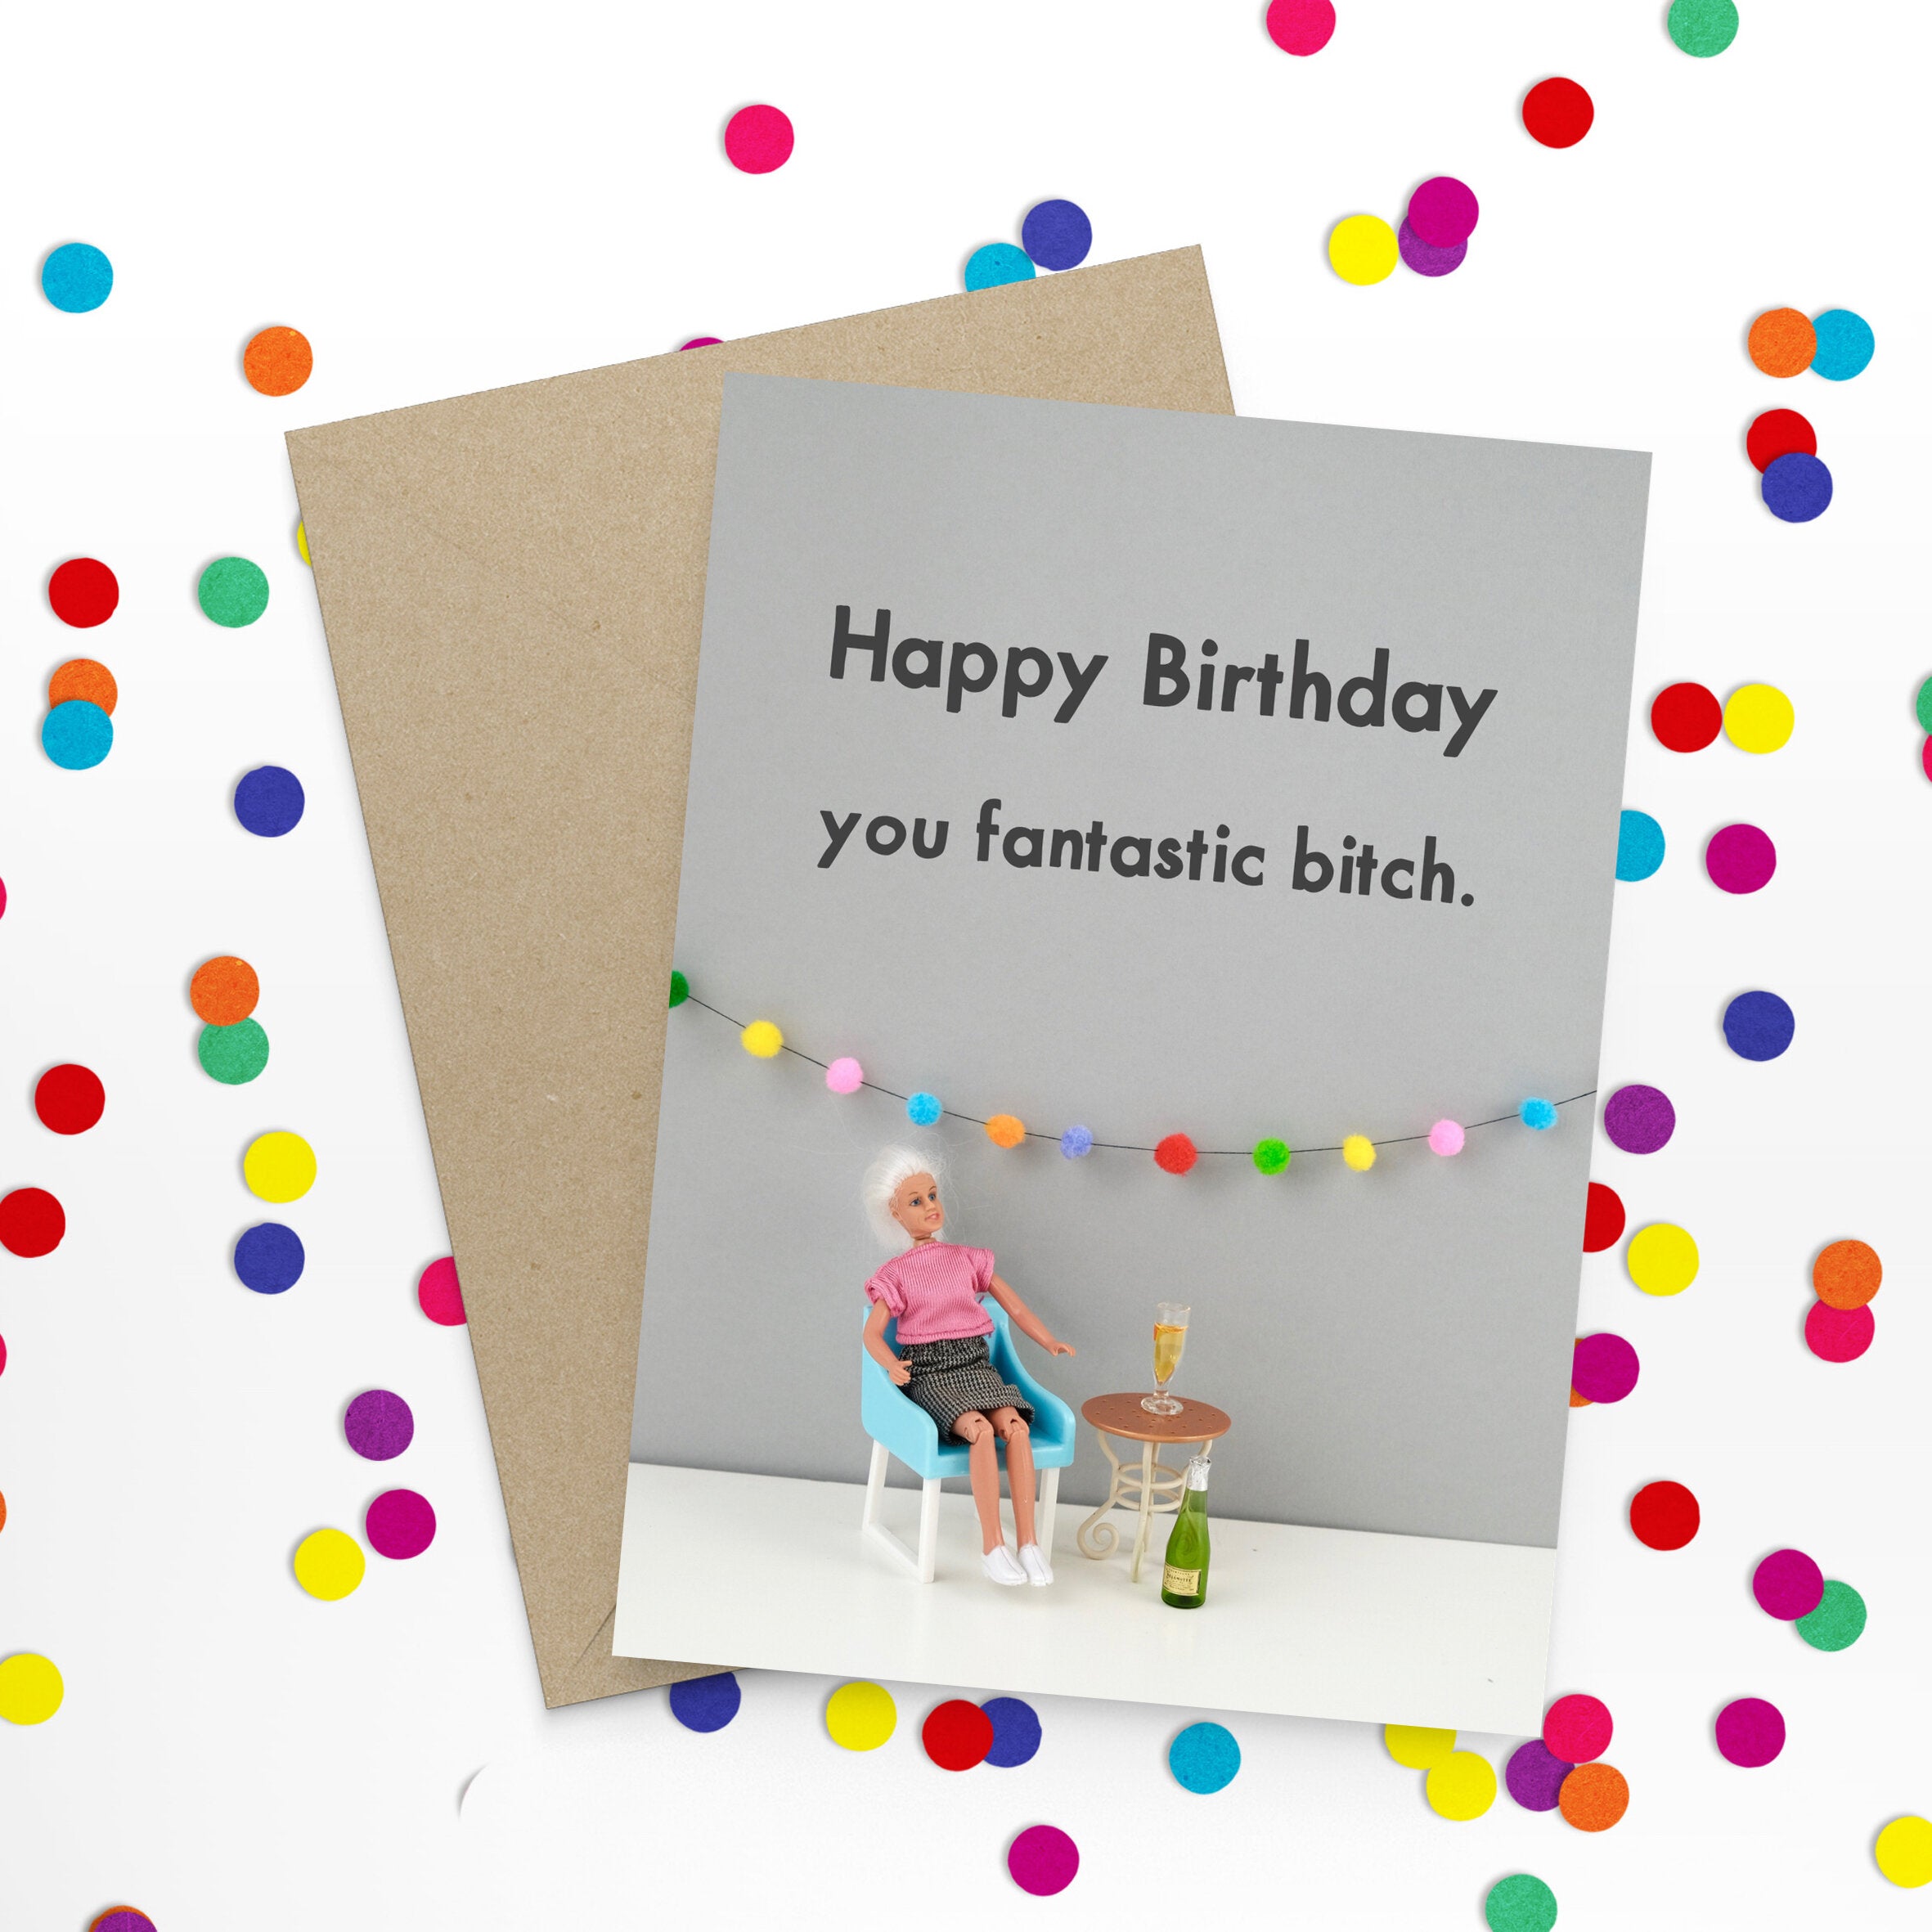 Happy Birthday You Fantastic Bitch Greetings Card by Bold and Bright